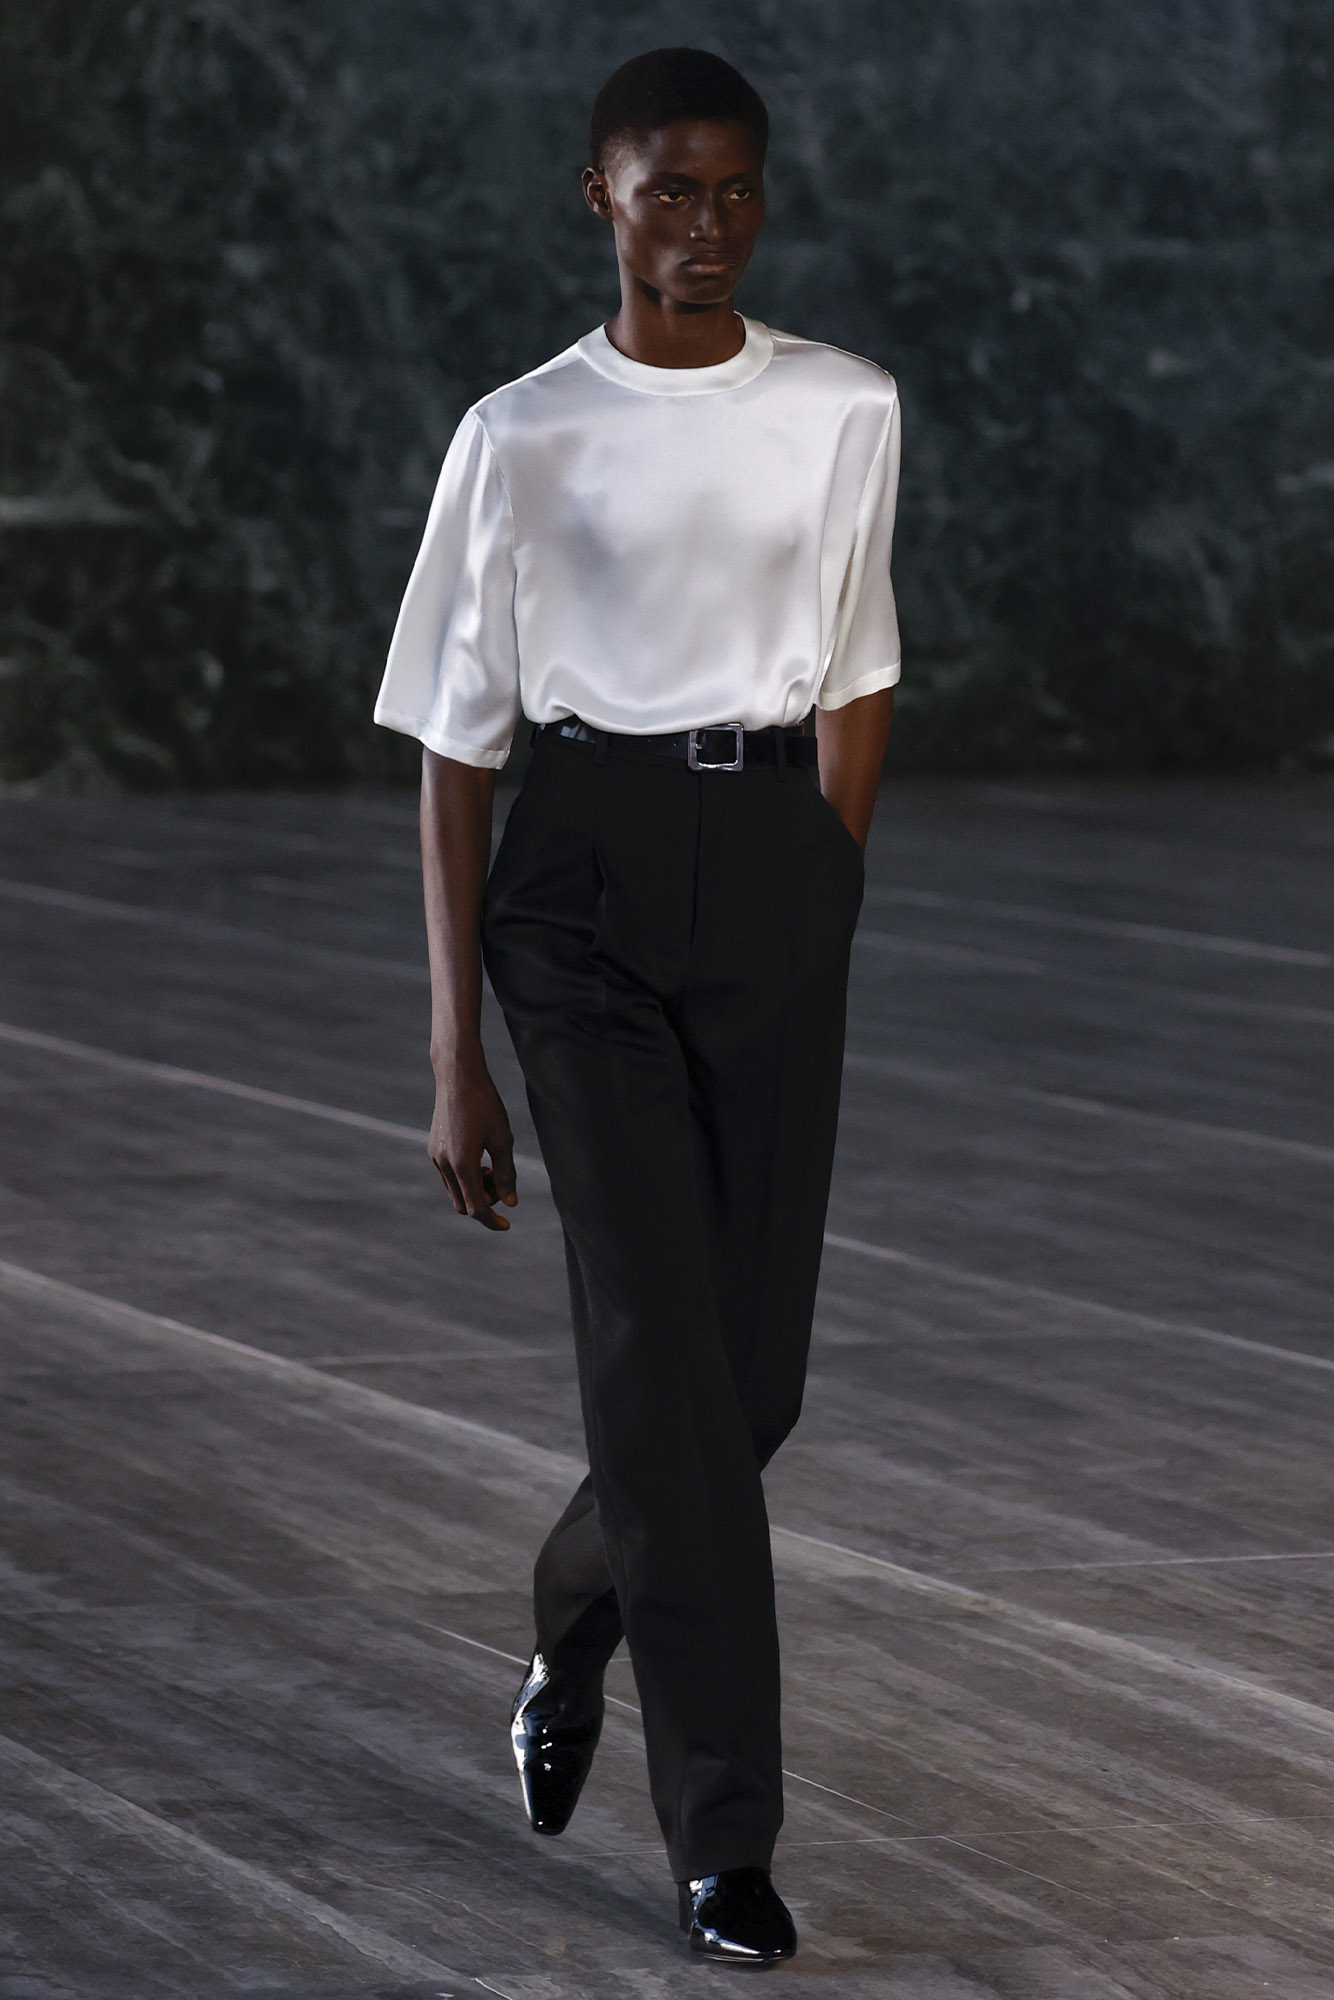 Saint Laurent Spring/Summer 2024 male model in satin t-shirt and dress pants on runway